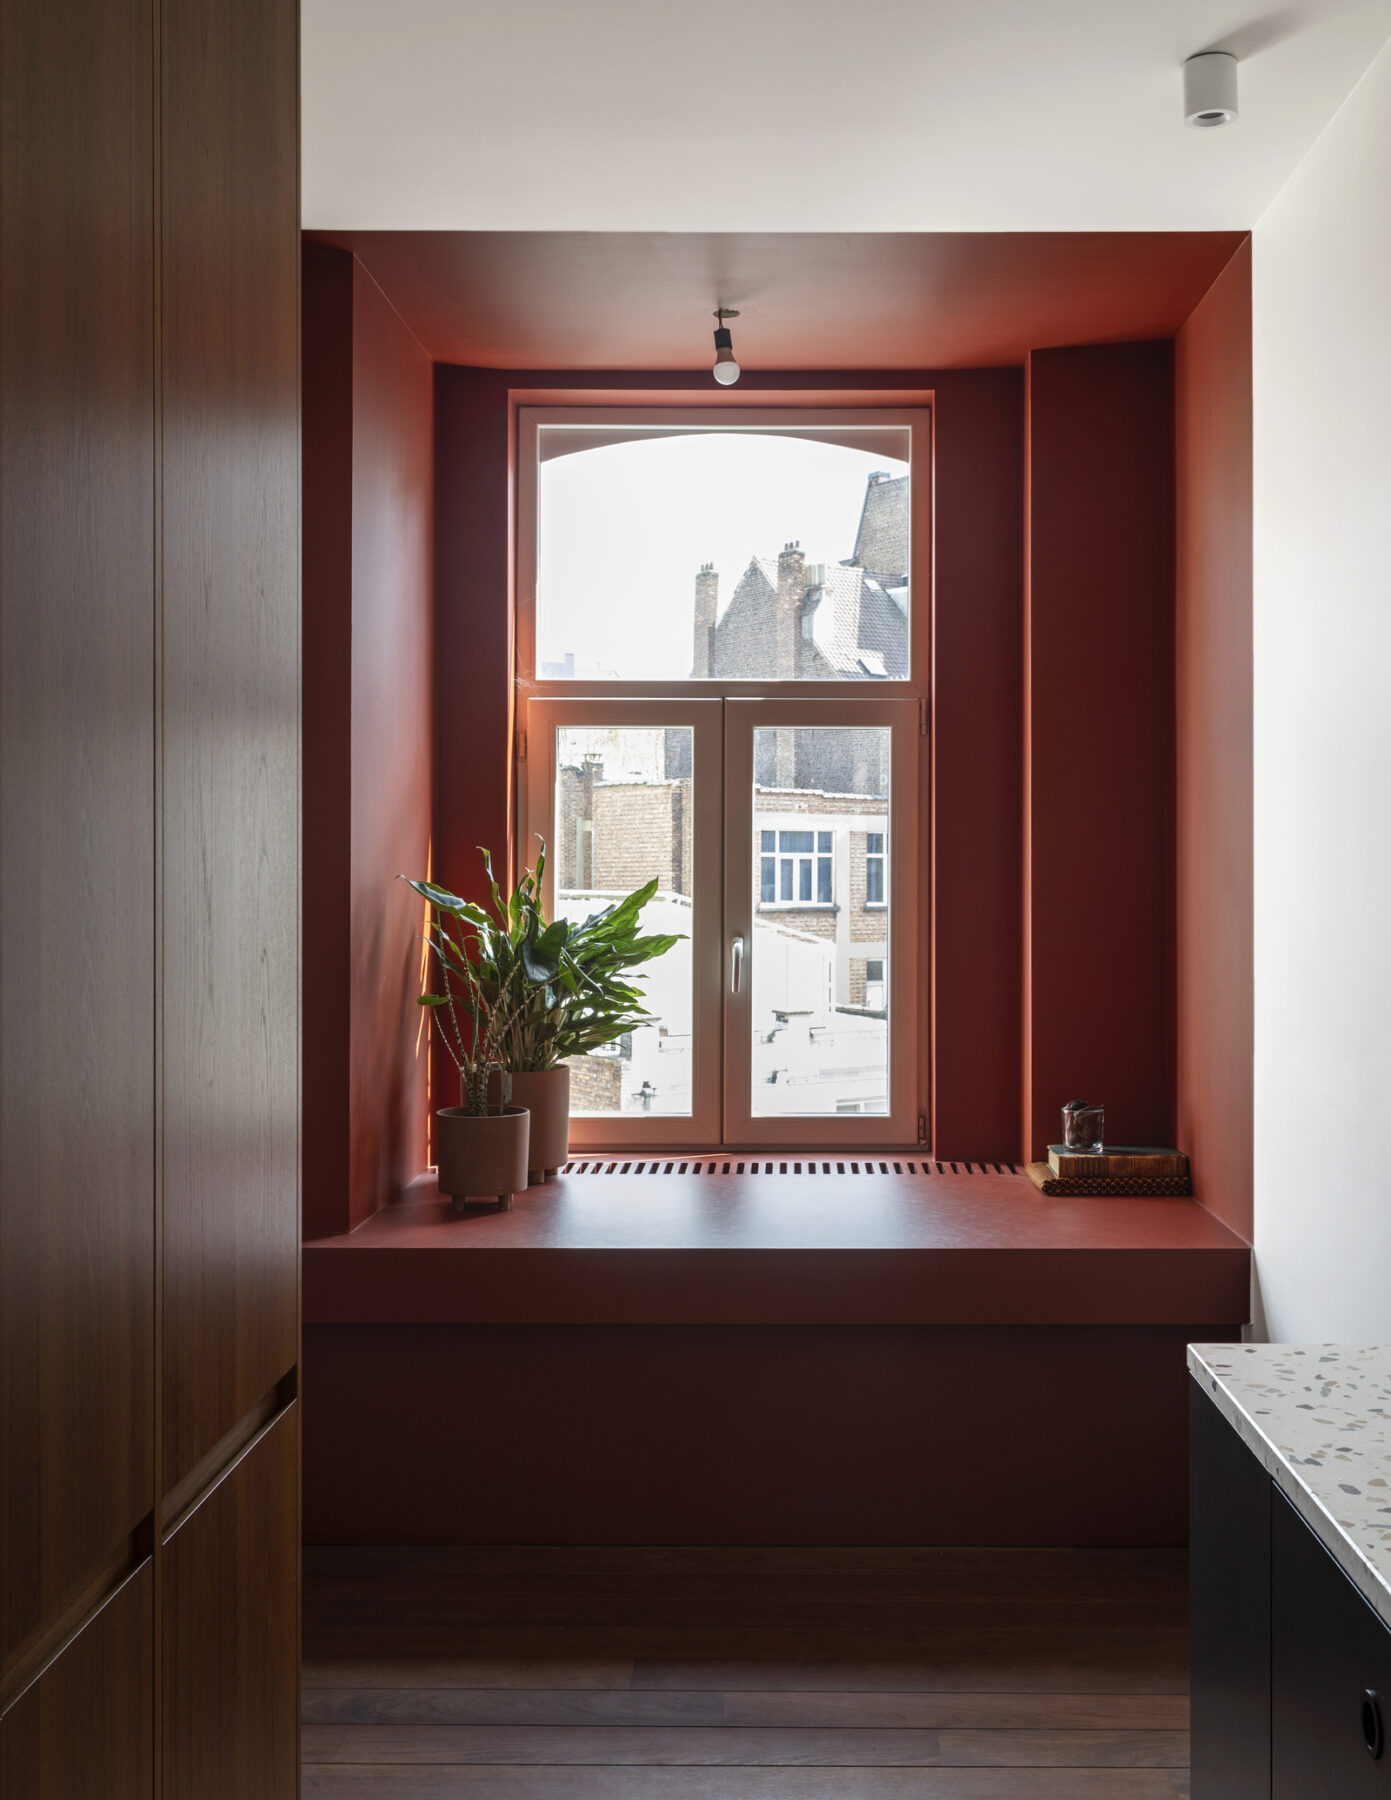 Archisearch Boulevard_Reconversion of a spacious apartment in Brussels | by dries otten